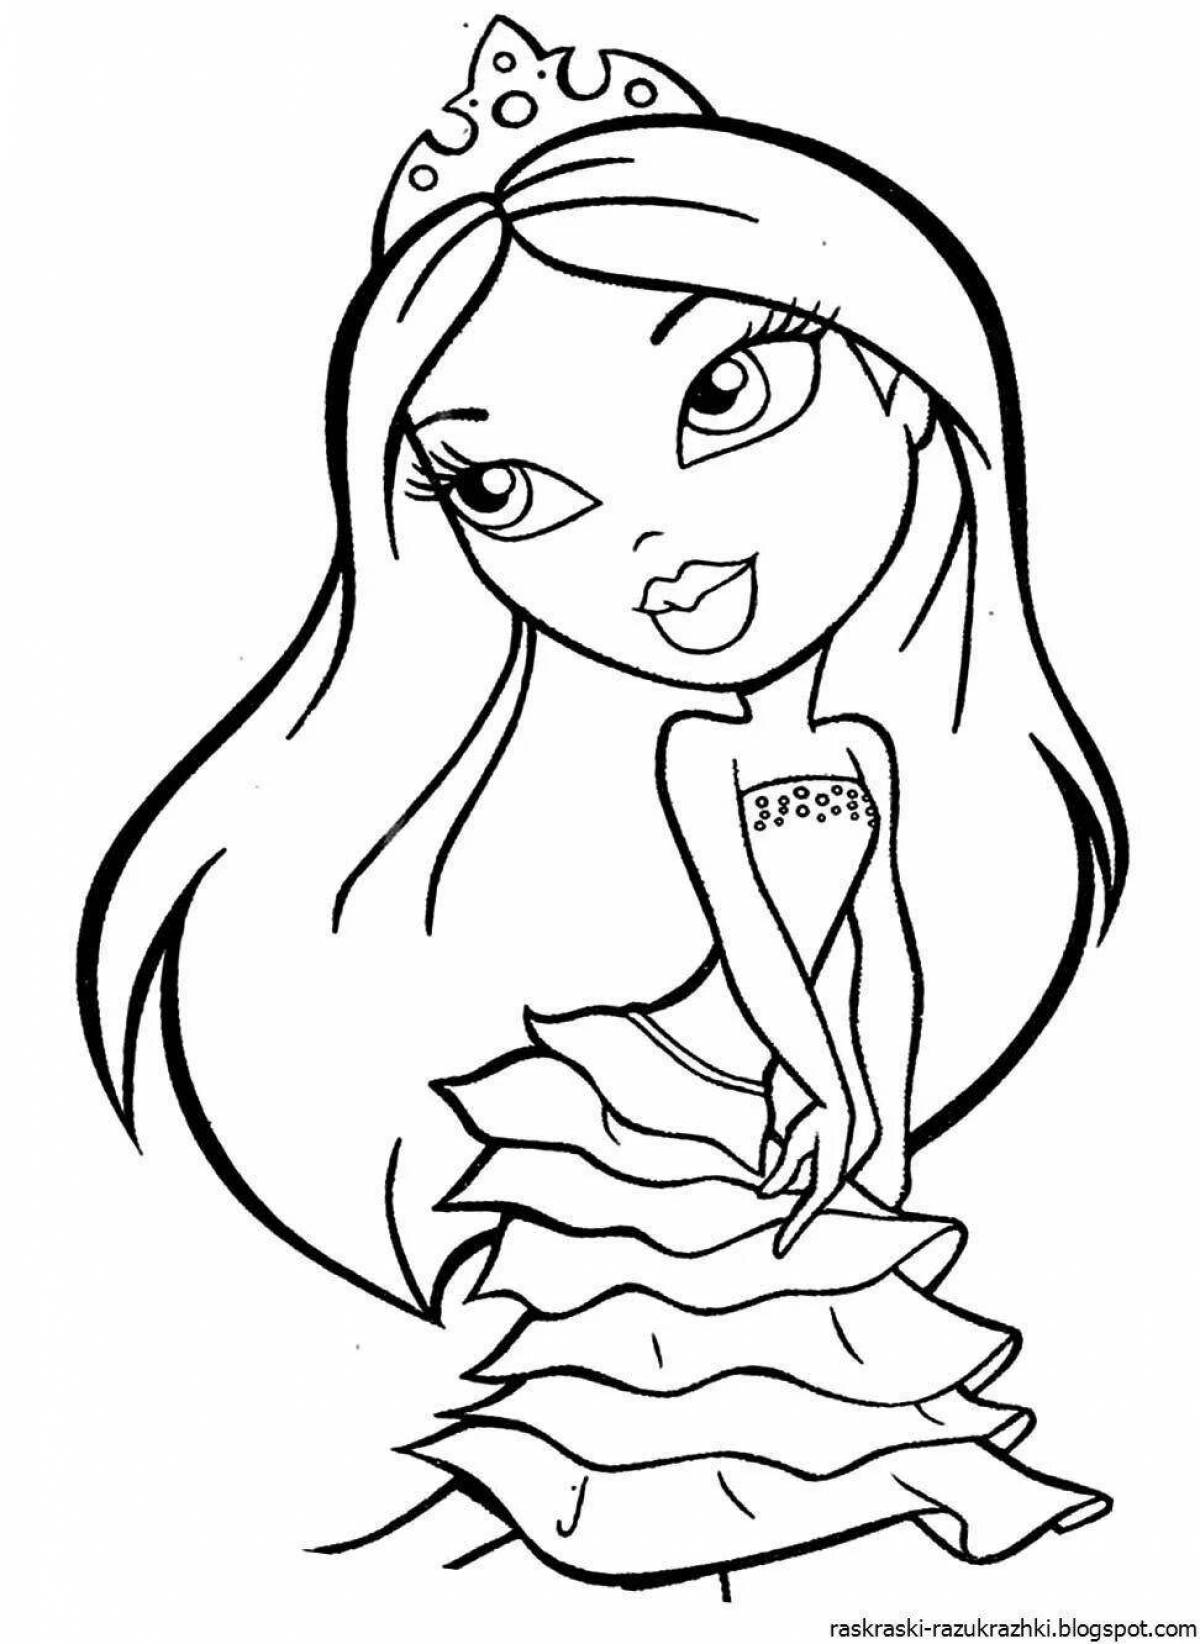 Charming coloring page 9 10 years old